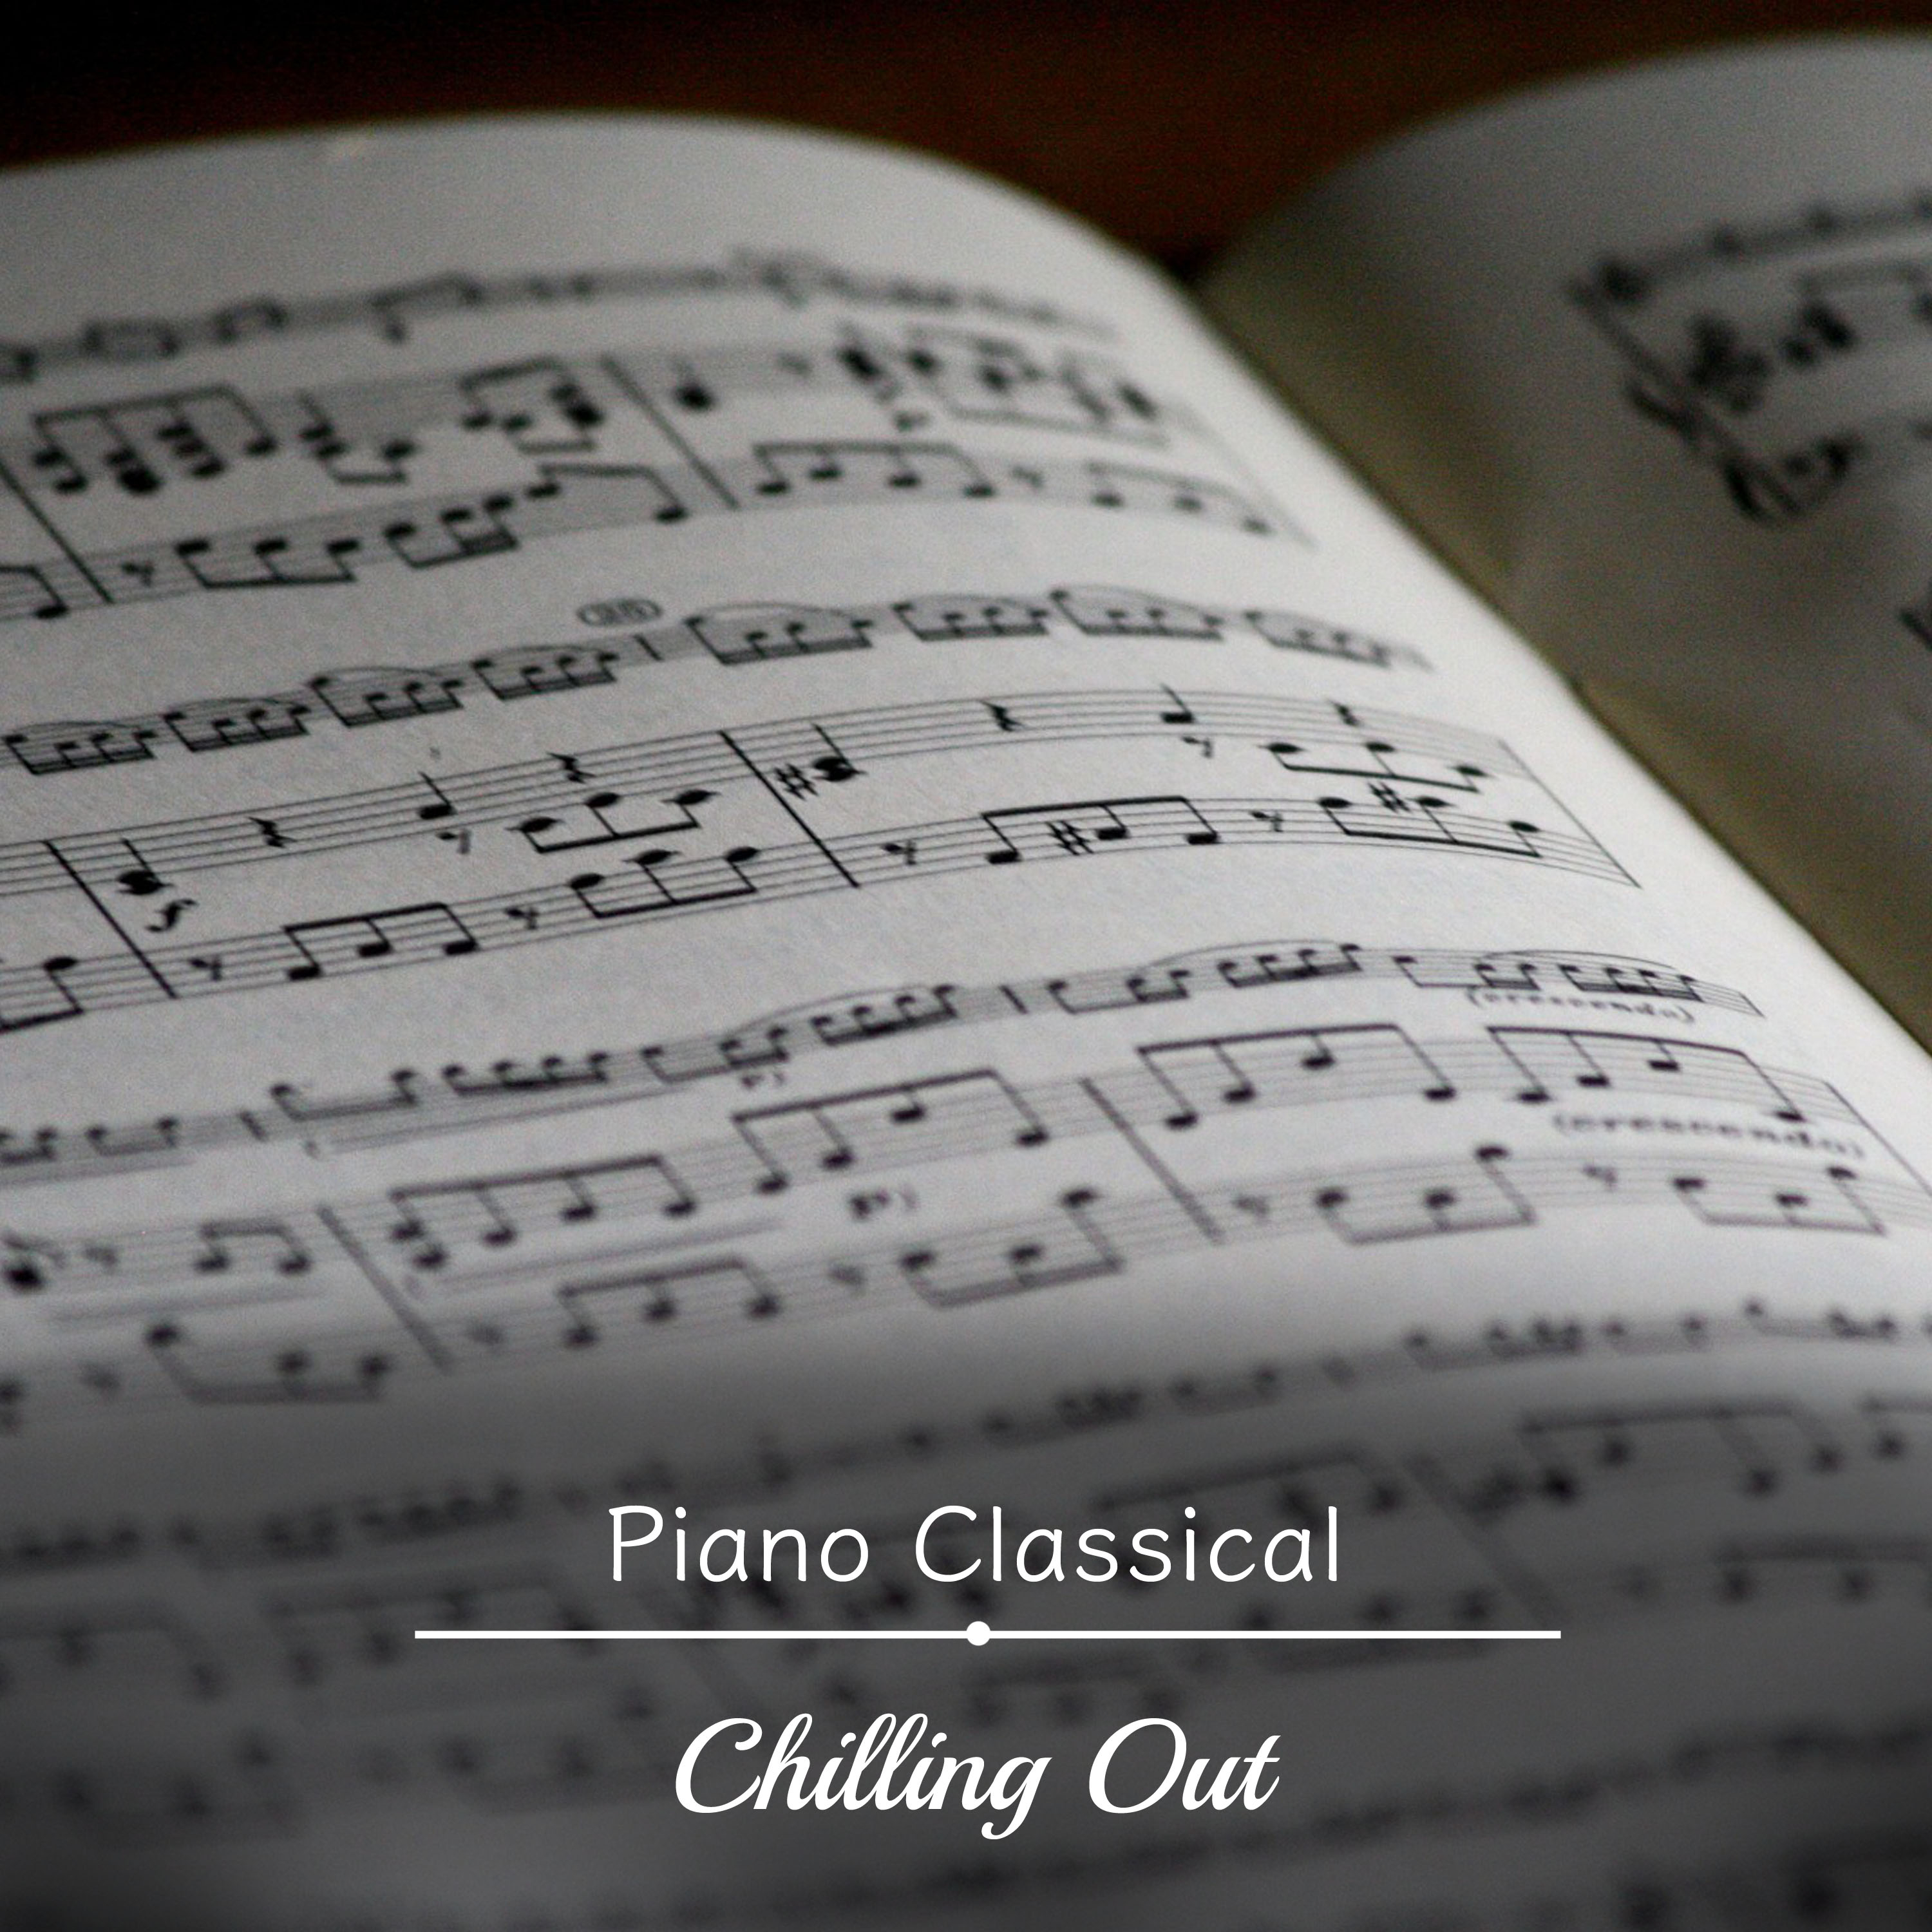 15 Relaxing Piano Classics for Chilling Out To